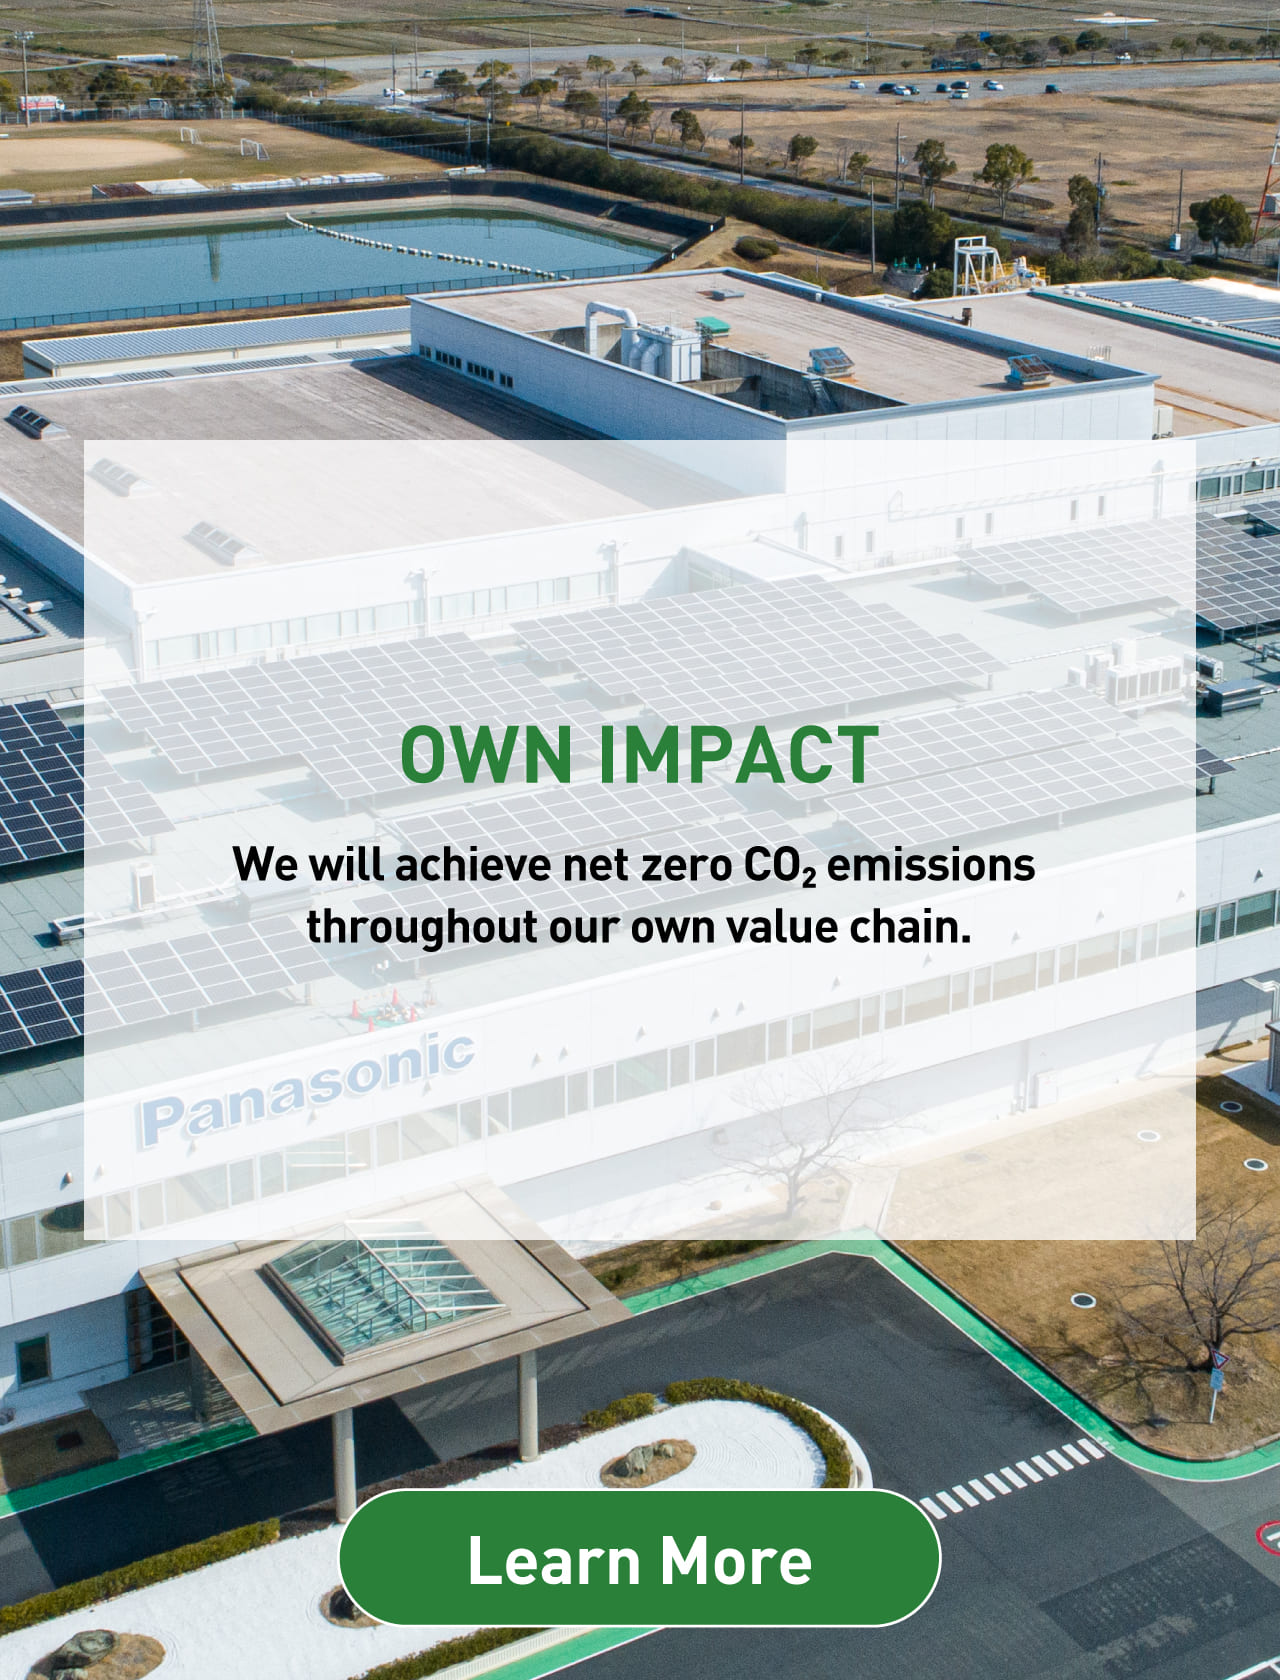 OWN IMPACT: We will achieve net zero CO2 emissions throughout our own value chain. Background photo: Aerial view of a Panasonic factory with rooftop solar panels installed. Learn more.